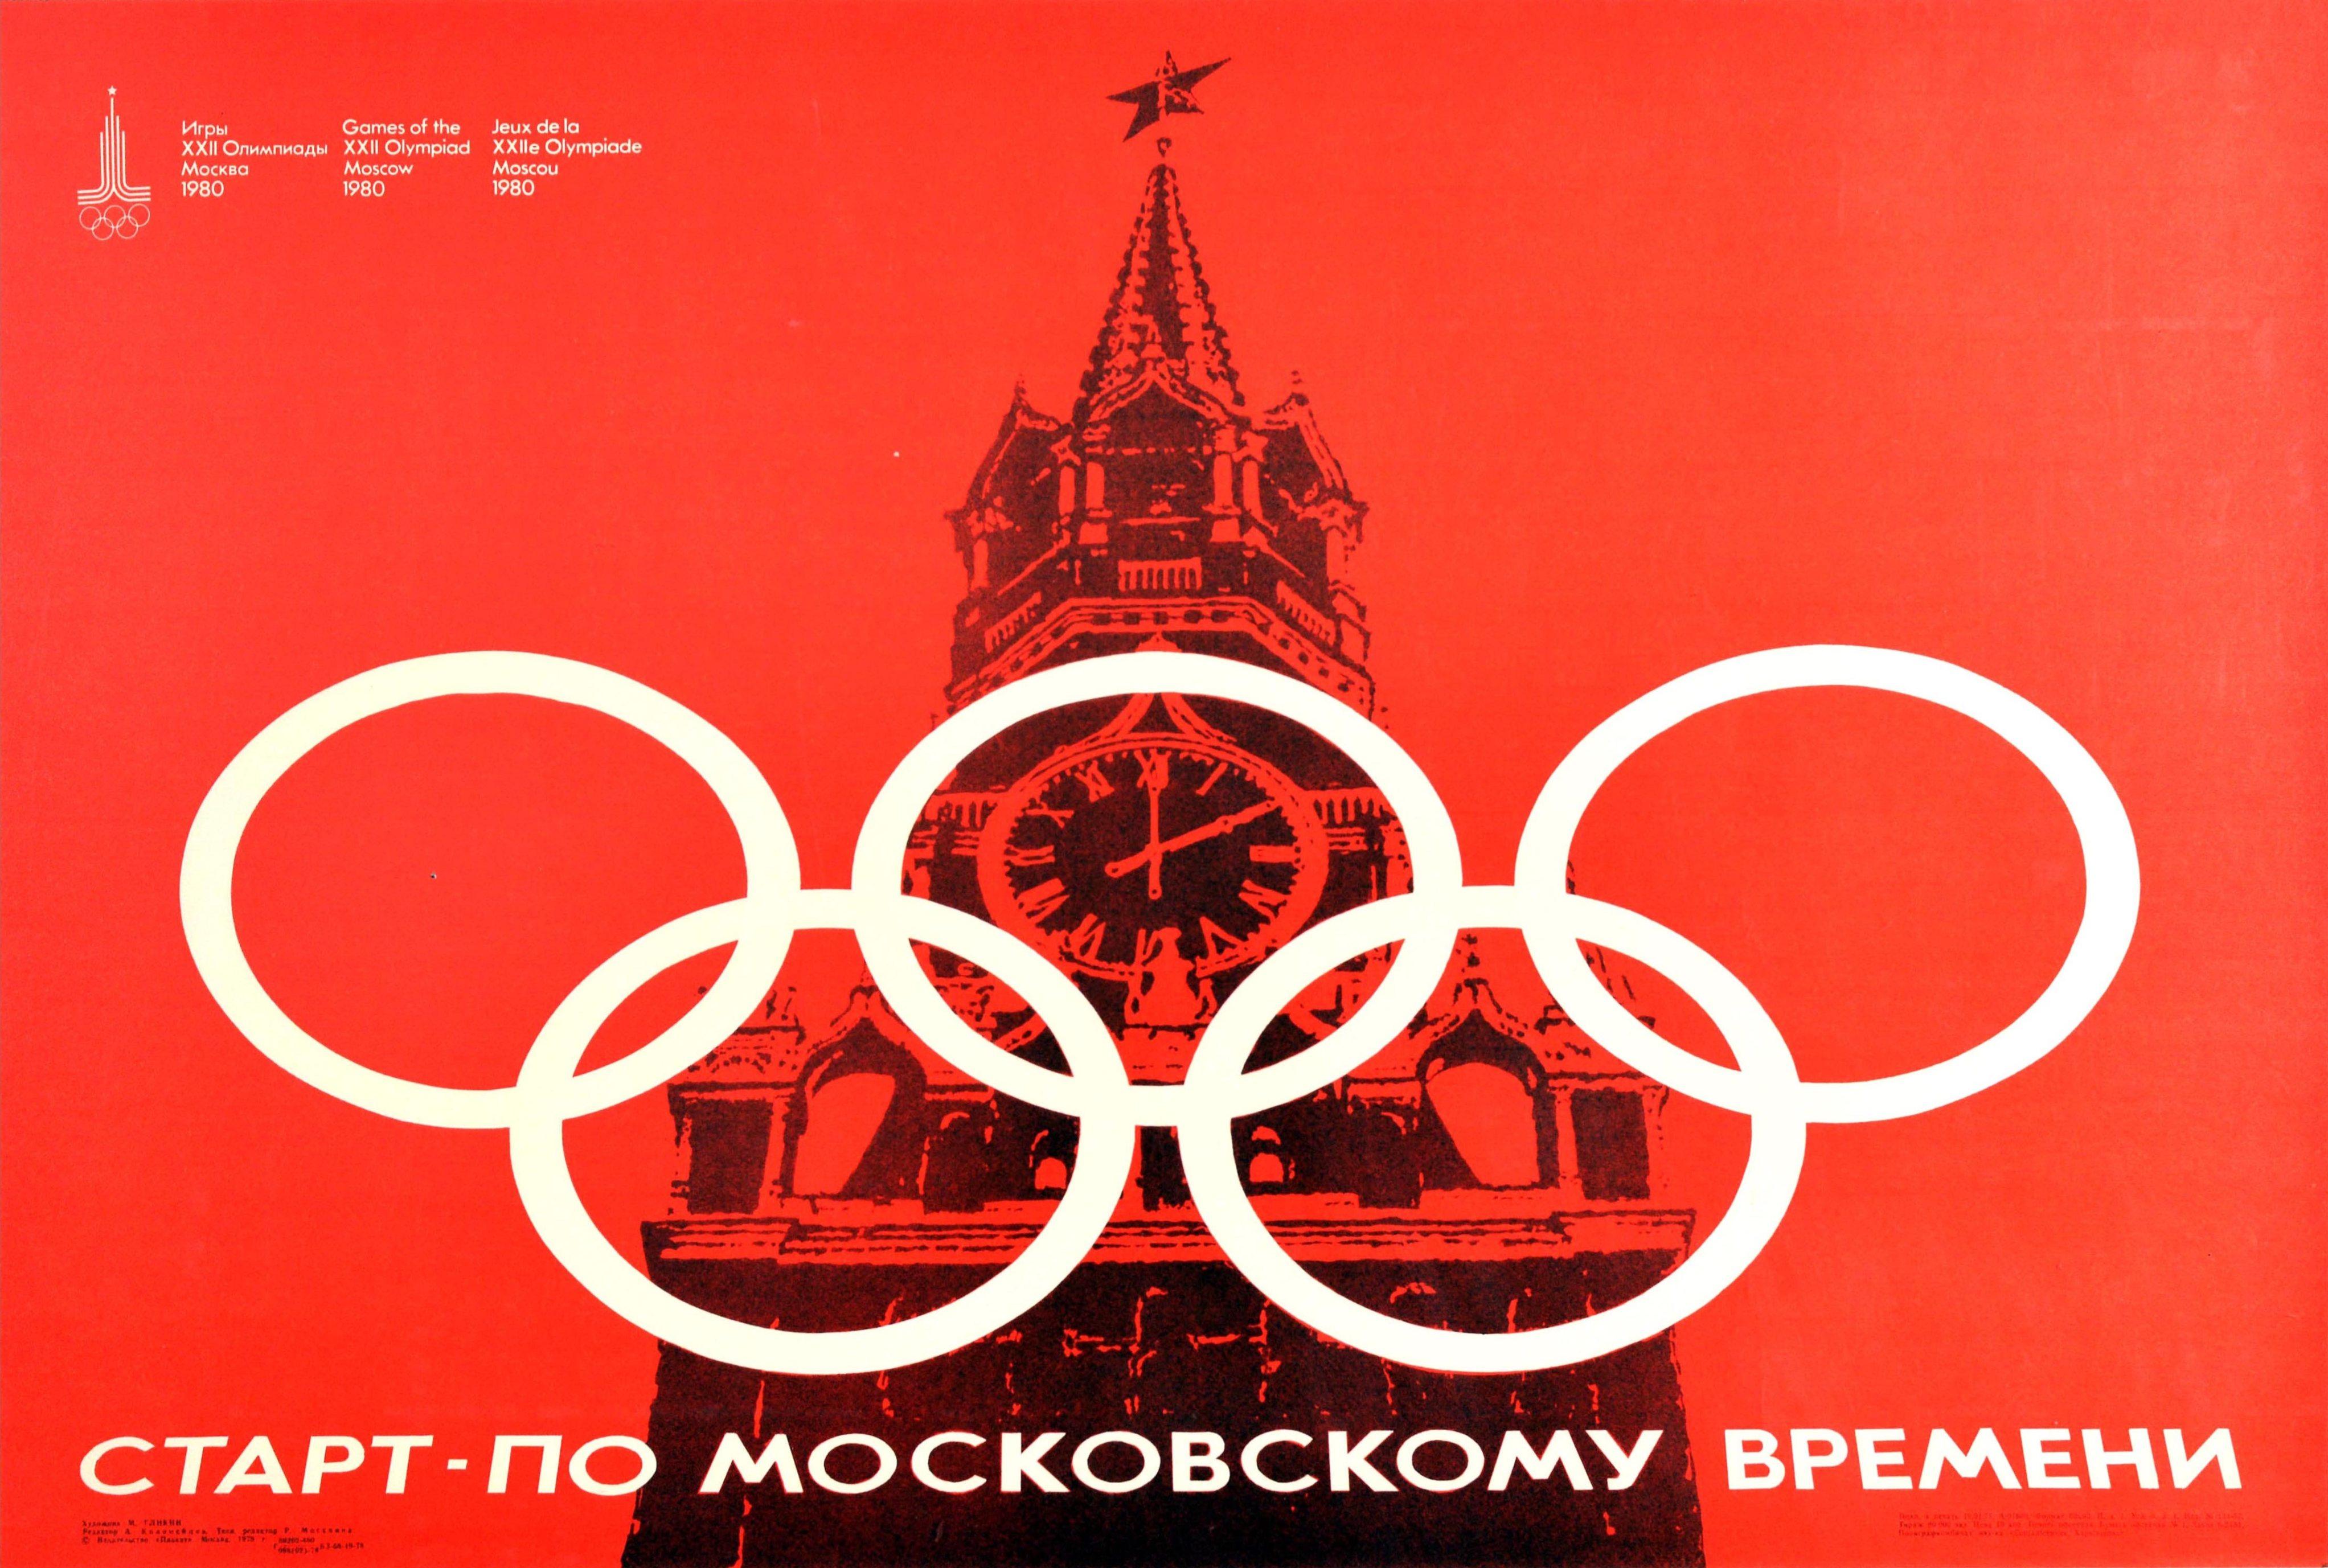 Unknown Print - Original Vintage Poster 1980 Olympic Games Start - On Moscow Time Kremlin Clock 